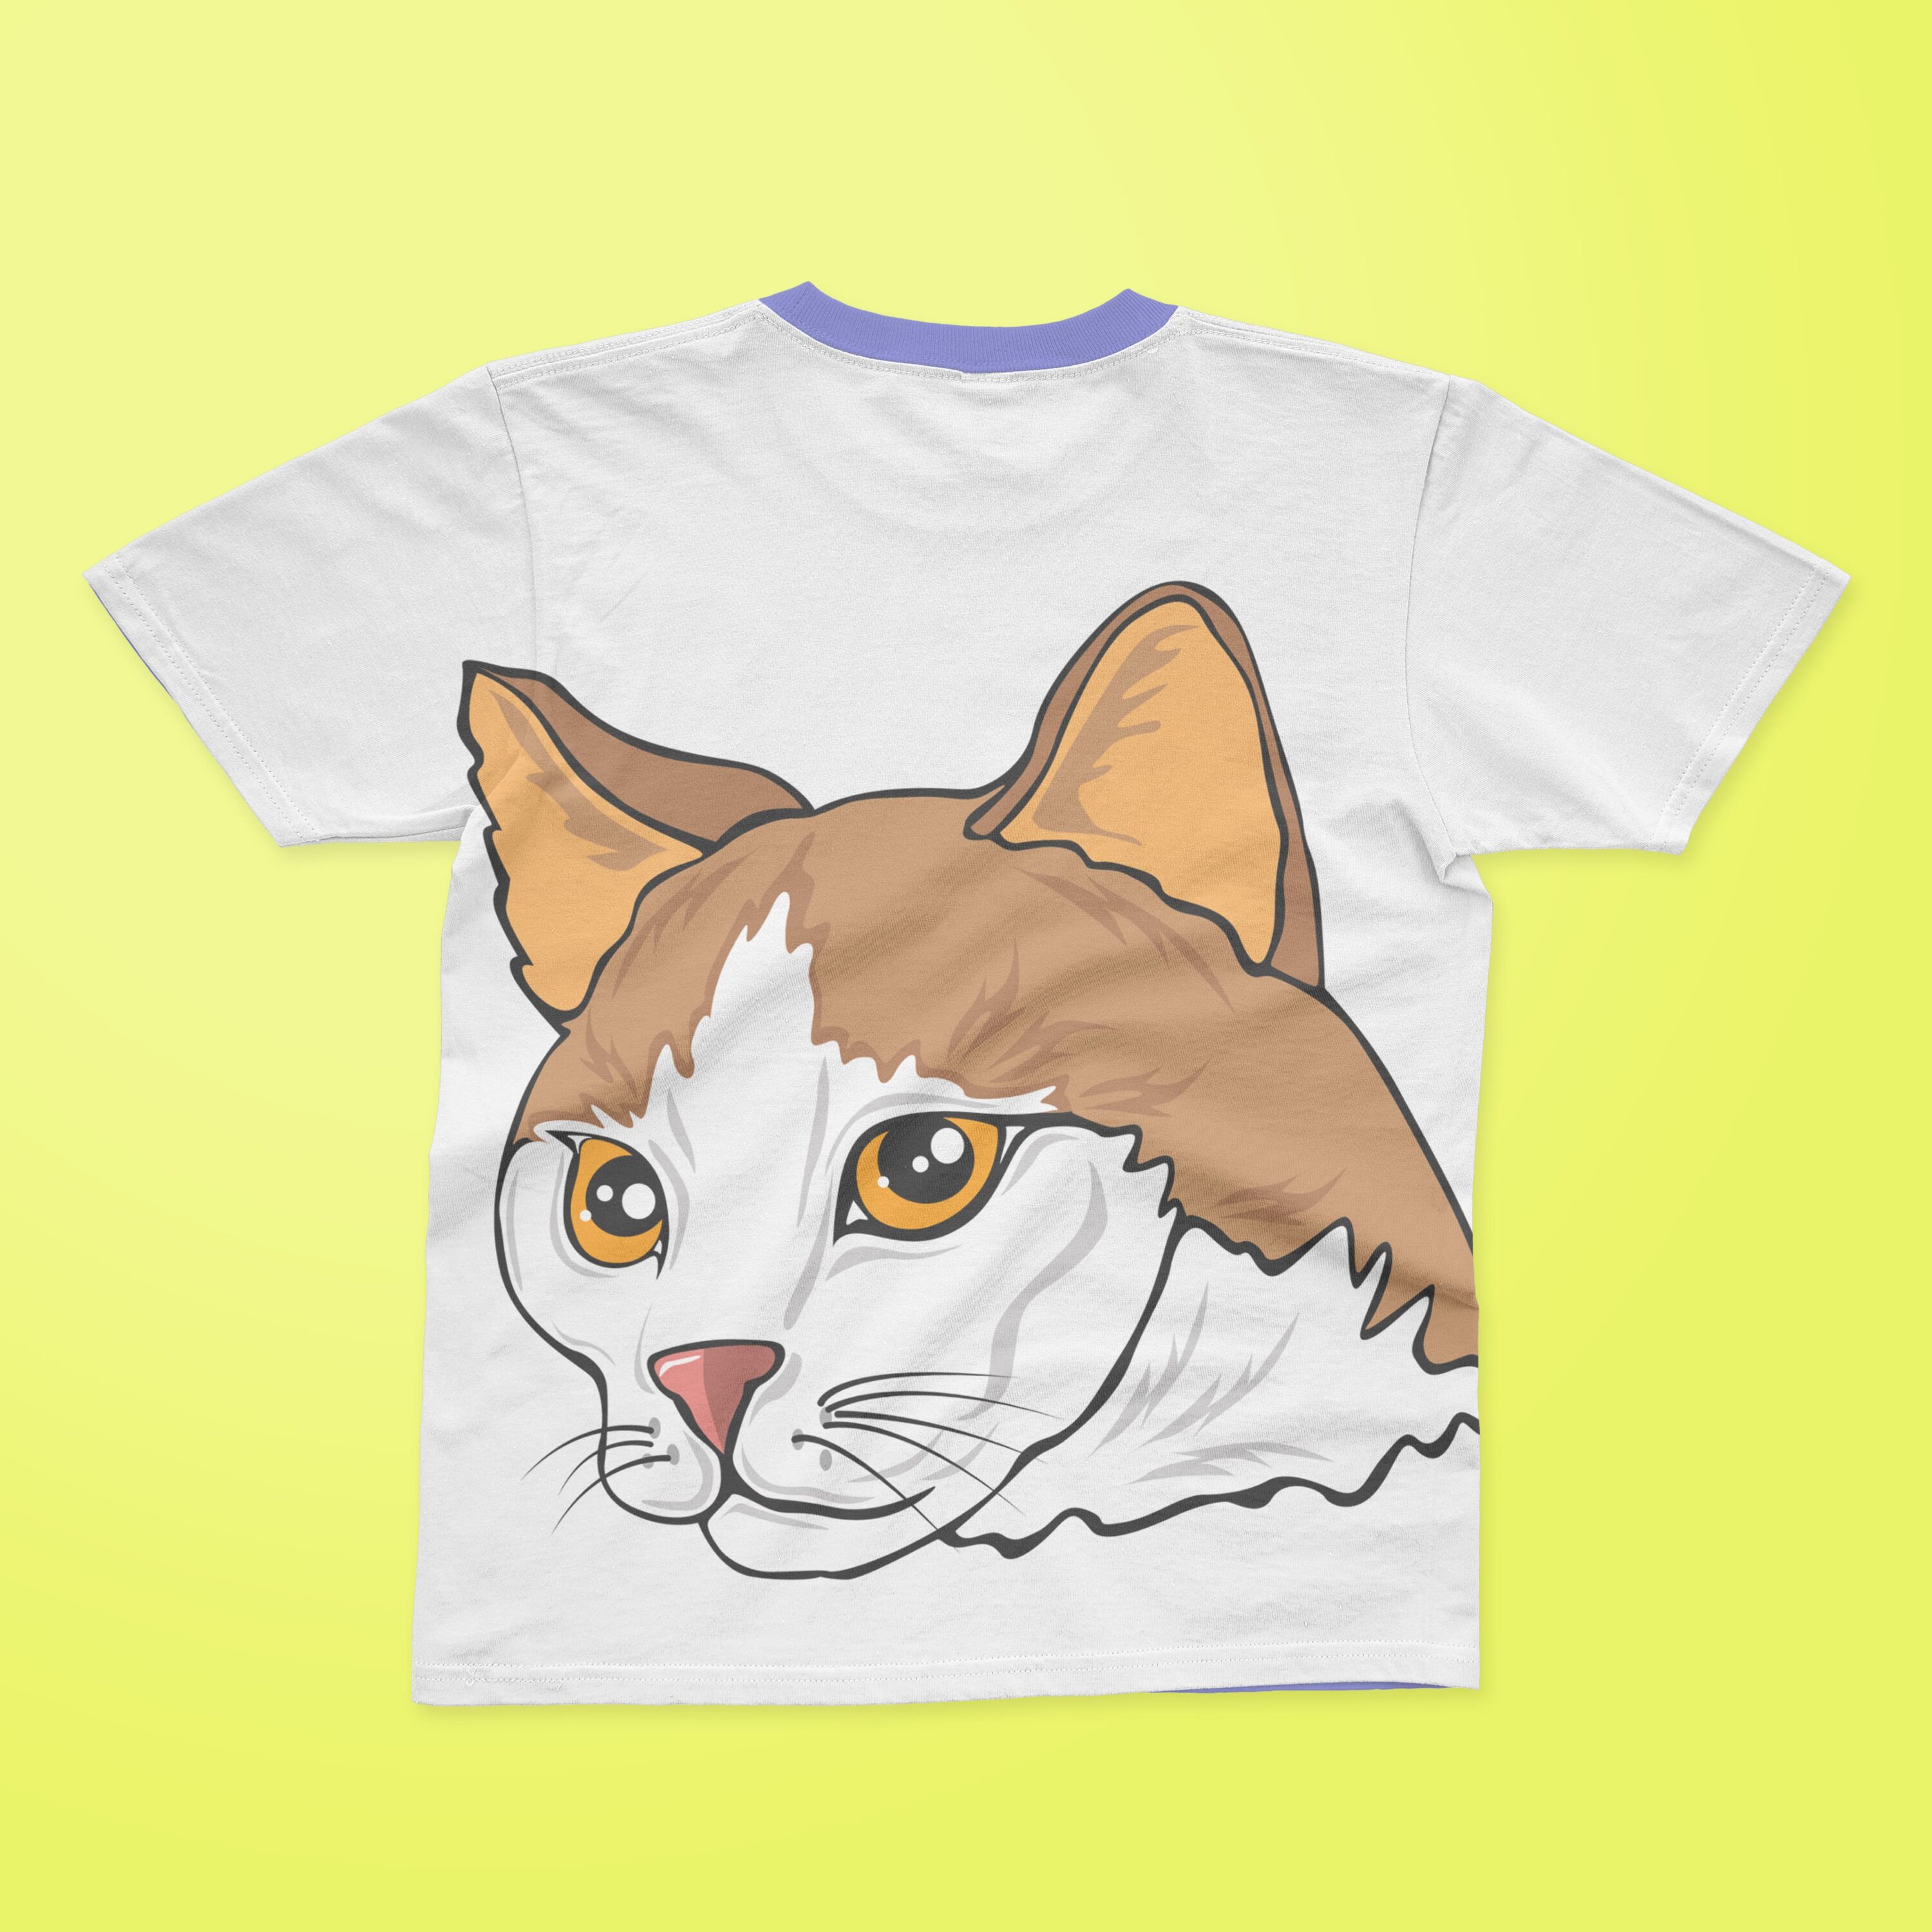 White T-shirt with a purple collar and a face of a brown and white cat.